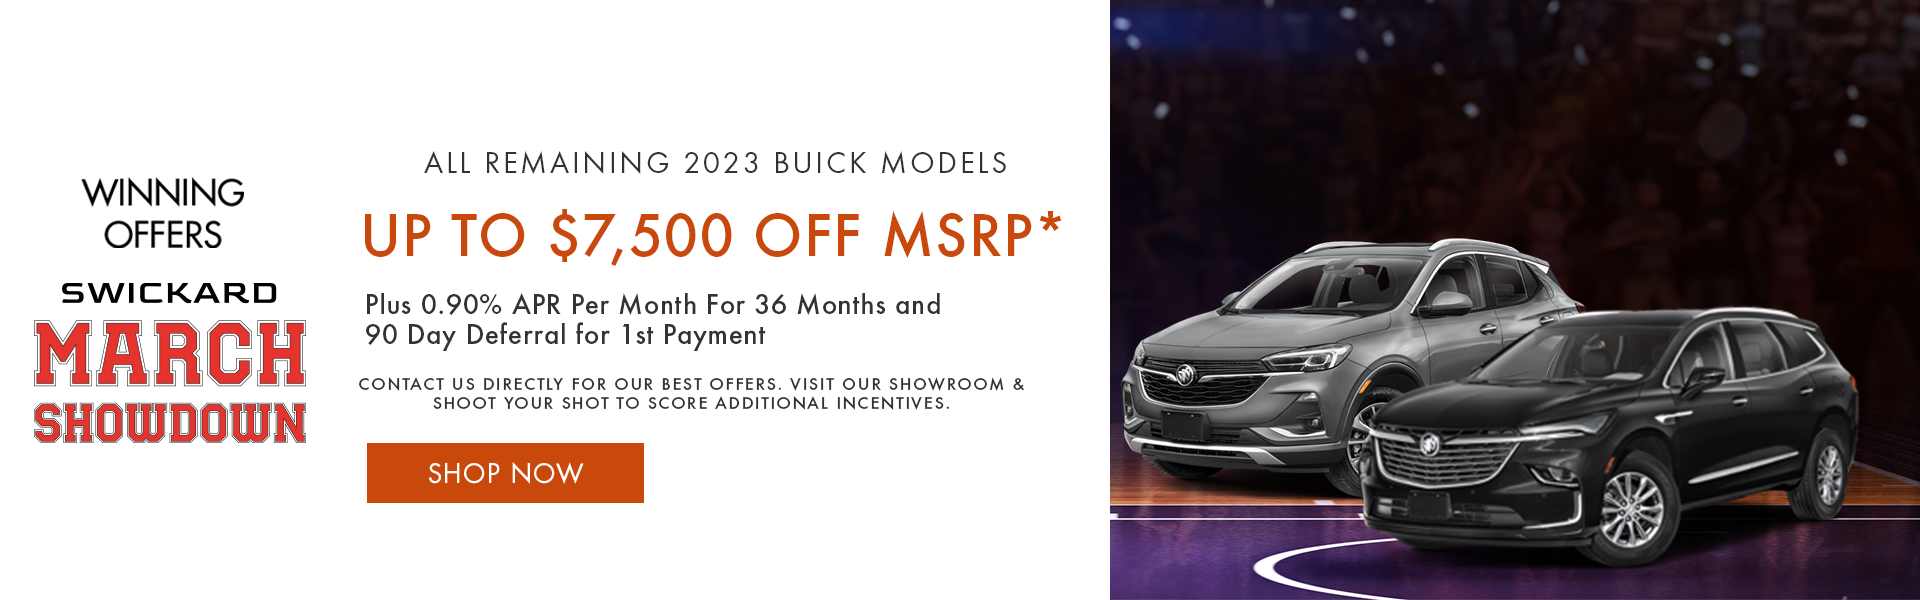 Up to $7,500 off MSRP* All Remaining 2023 Buick Models